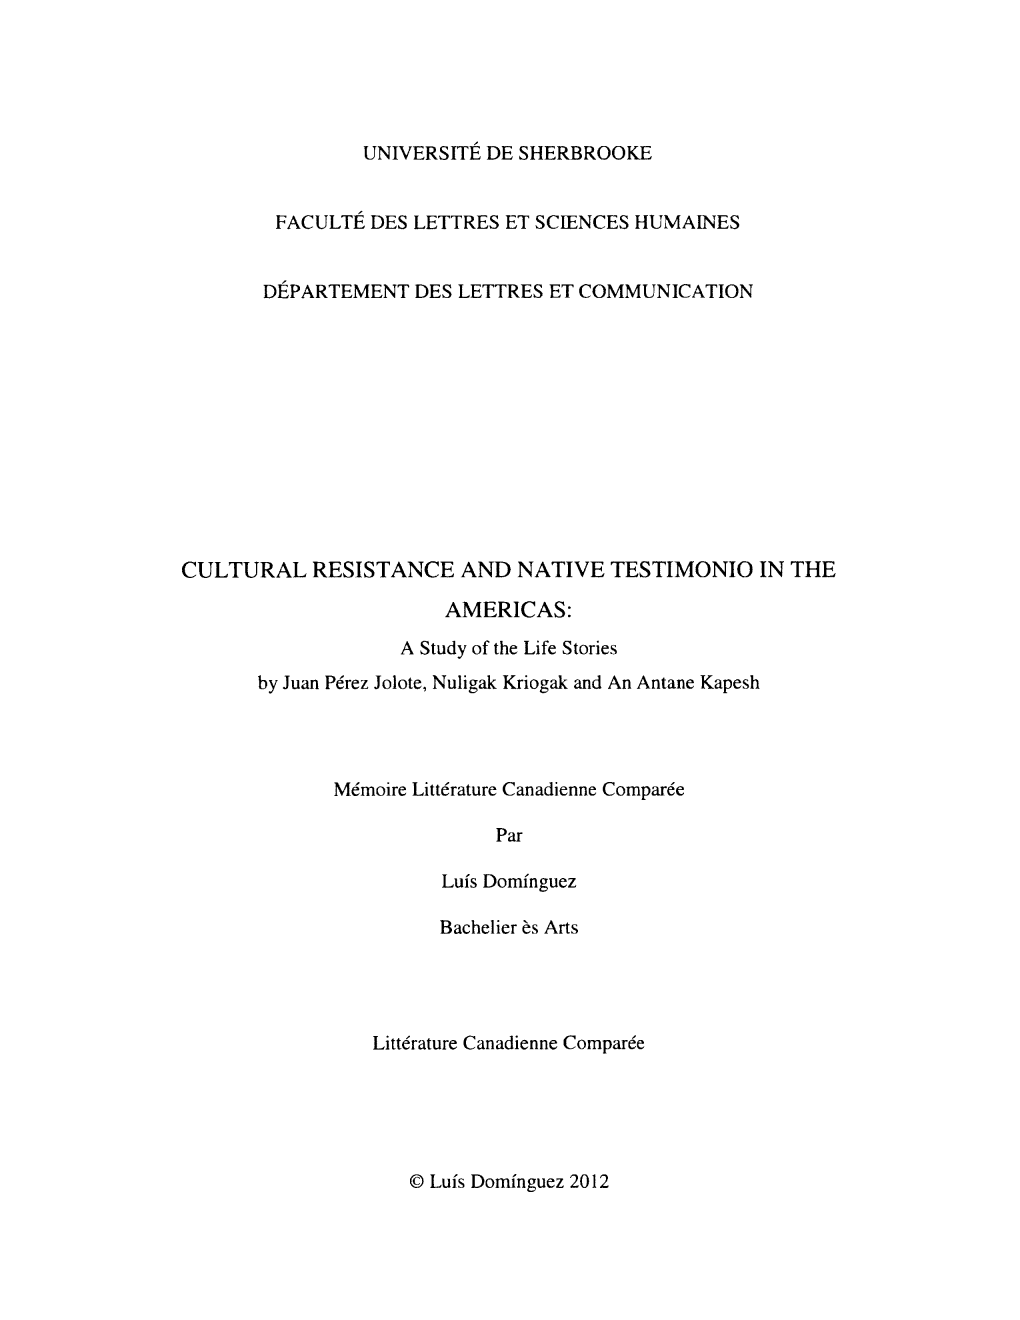 CULTURAL RESISTANCE and NATIVE TESTIMONIO in the AMERICAS: a Study of the Life Stories by Juan Perez Jolote, Nuligak Kriogak and an Antane Kapesh